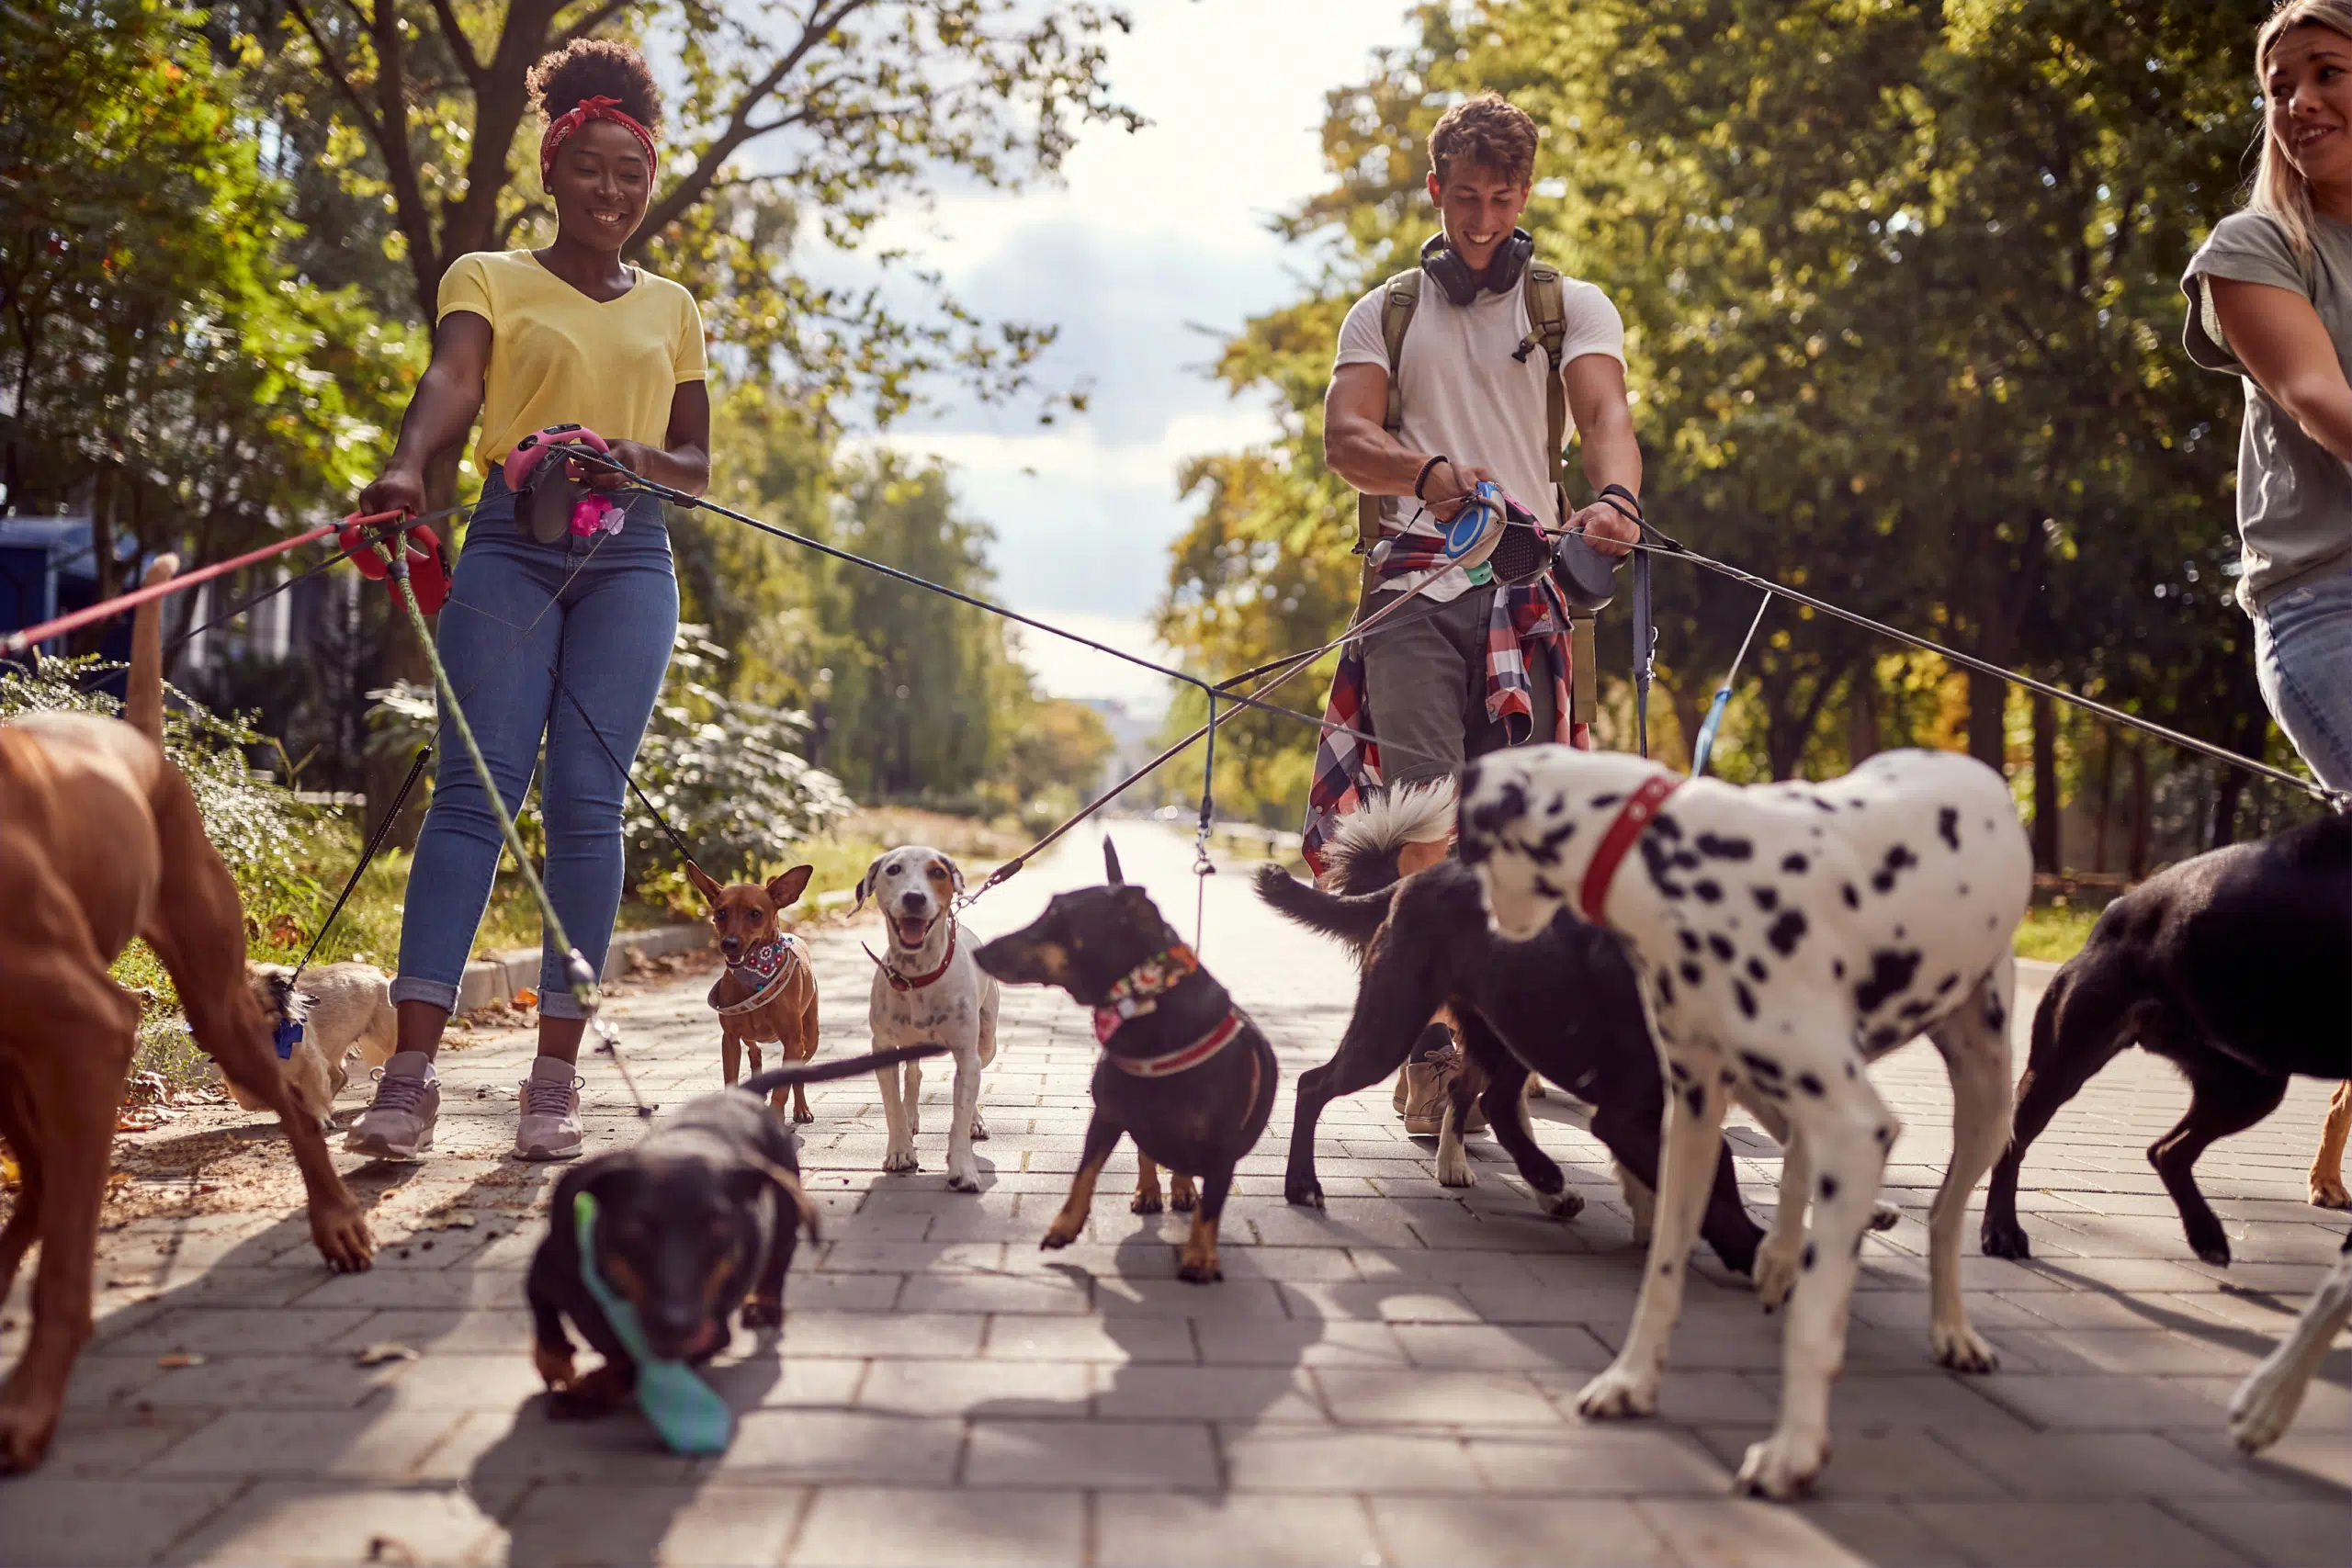 A group of people and dogs on walk.